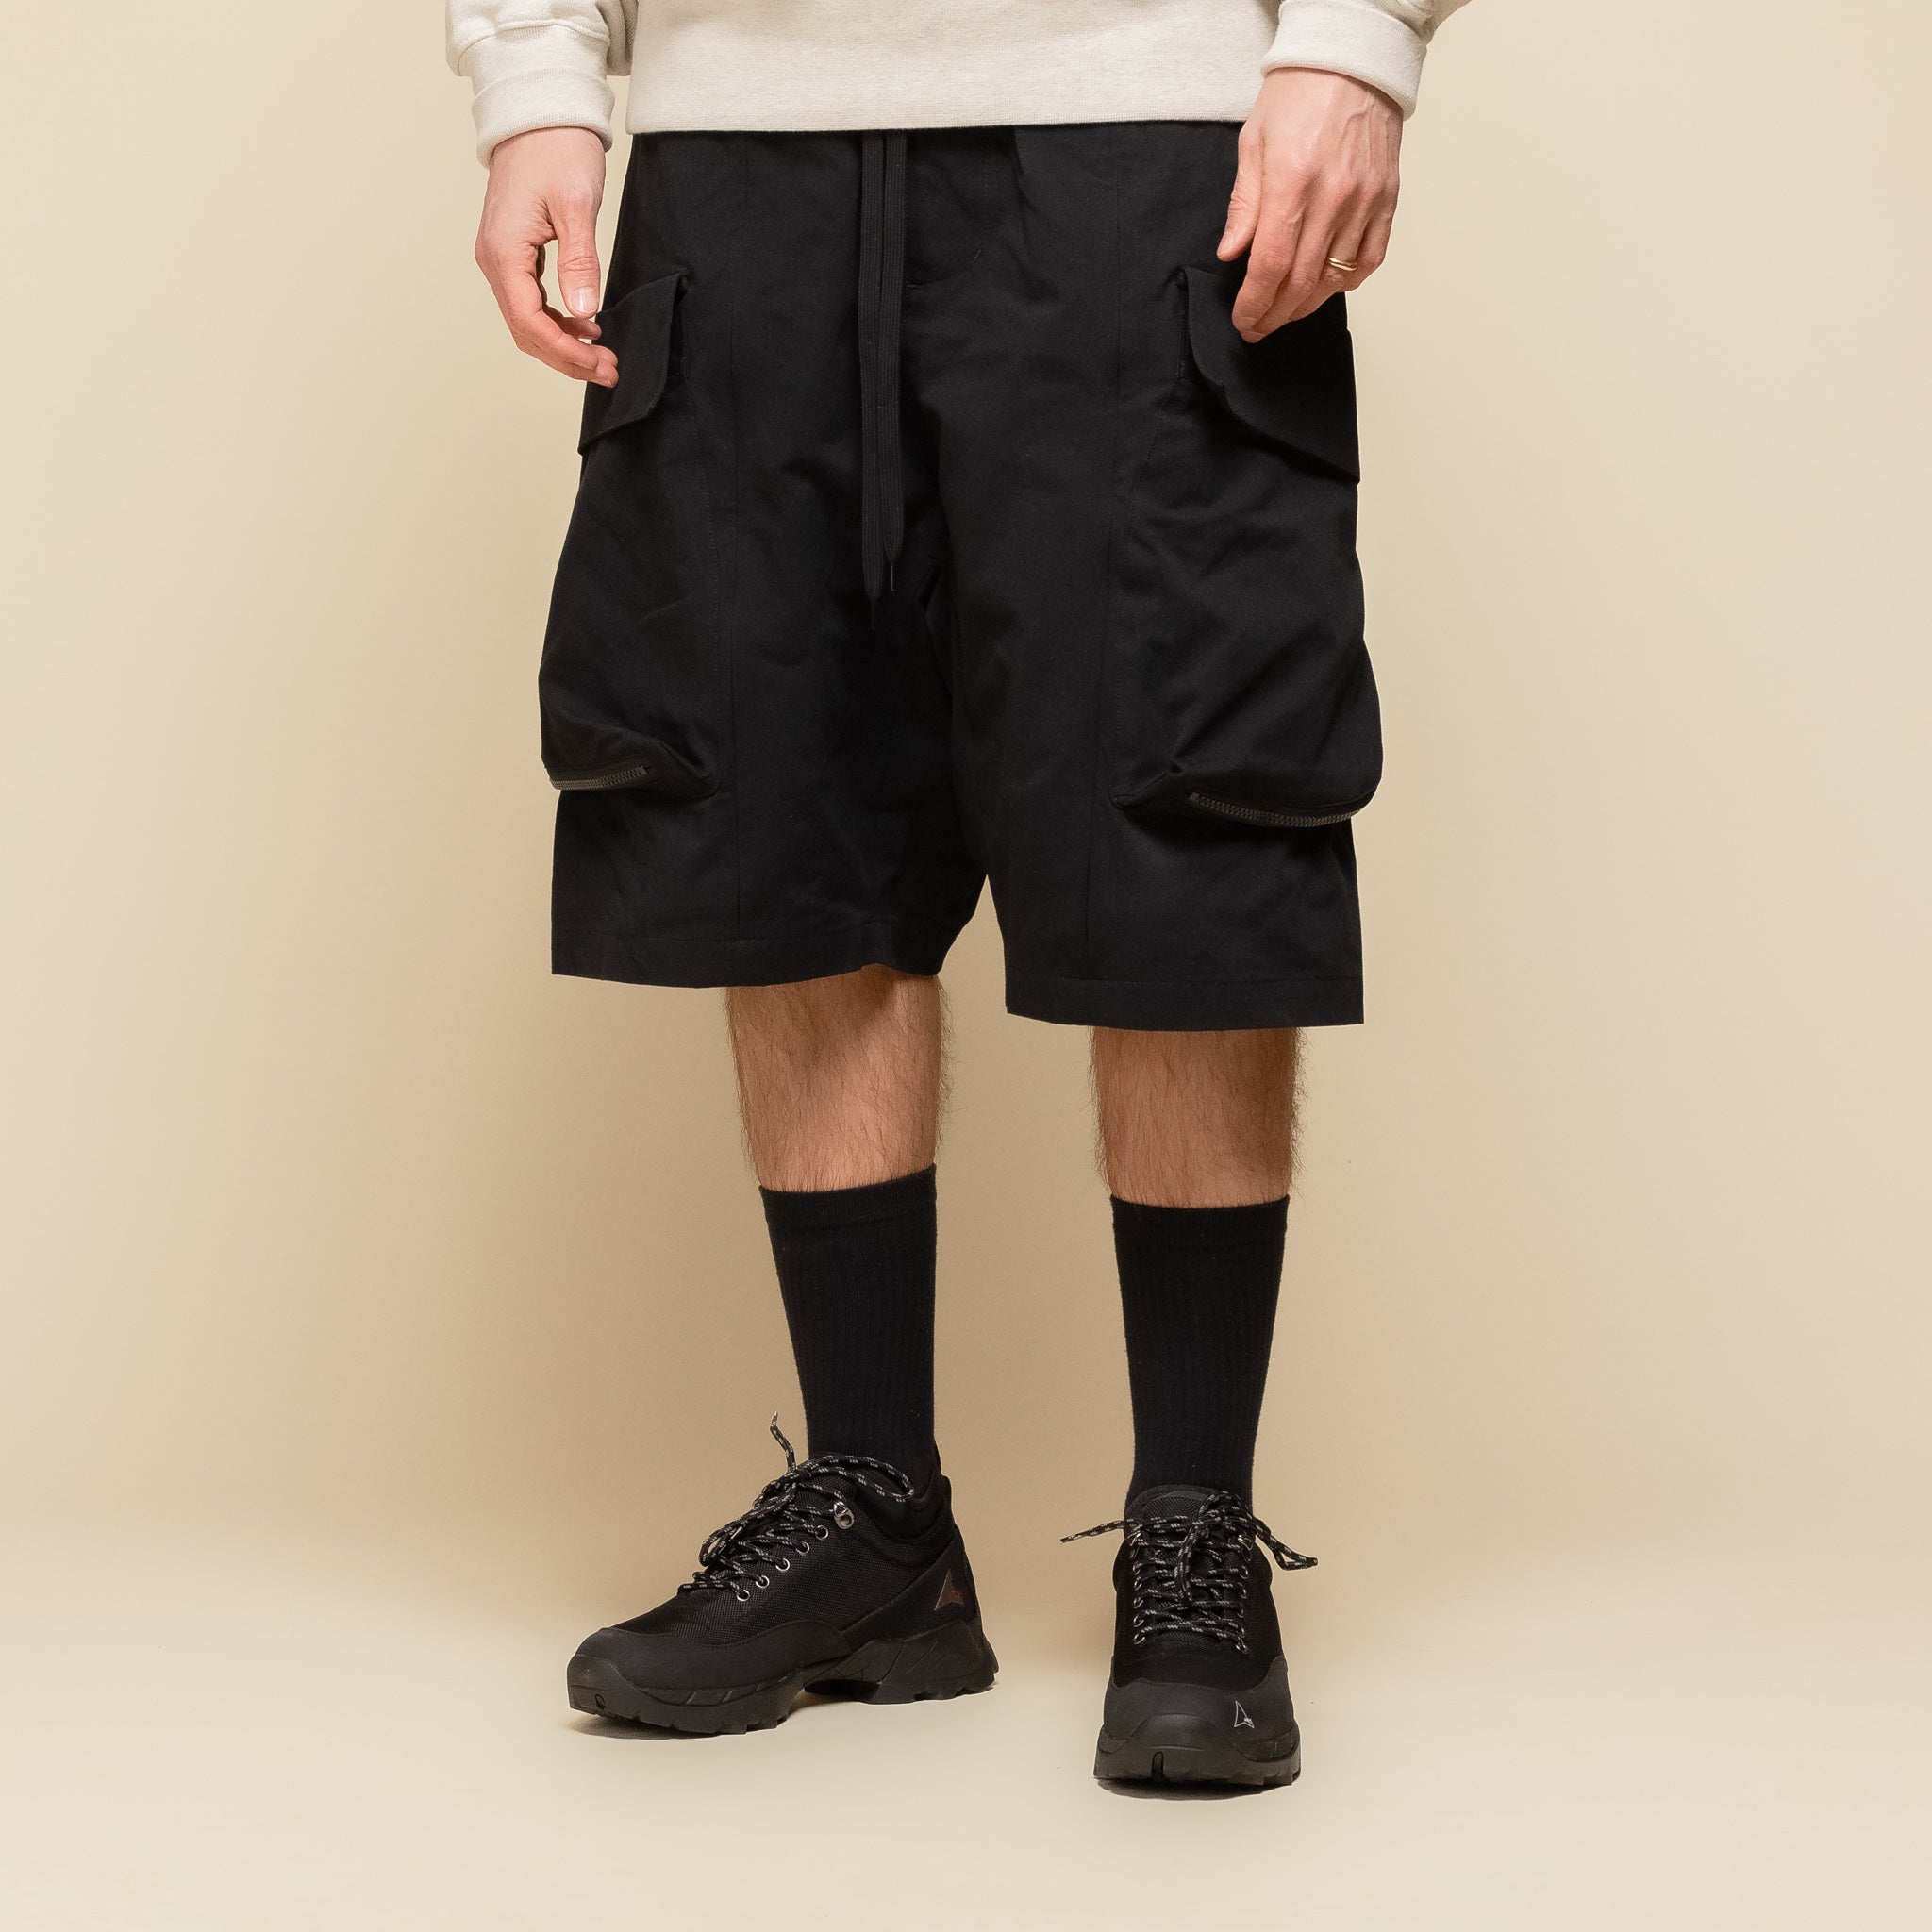 Poliquant - Jungle Shorts With Deforming Large Pockets - Black "poliquant stockists" "poliquant shorts" "poliquant website"